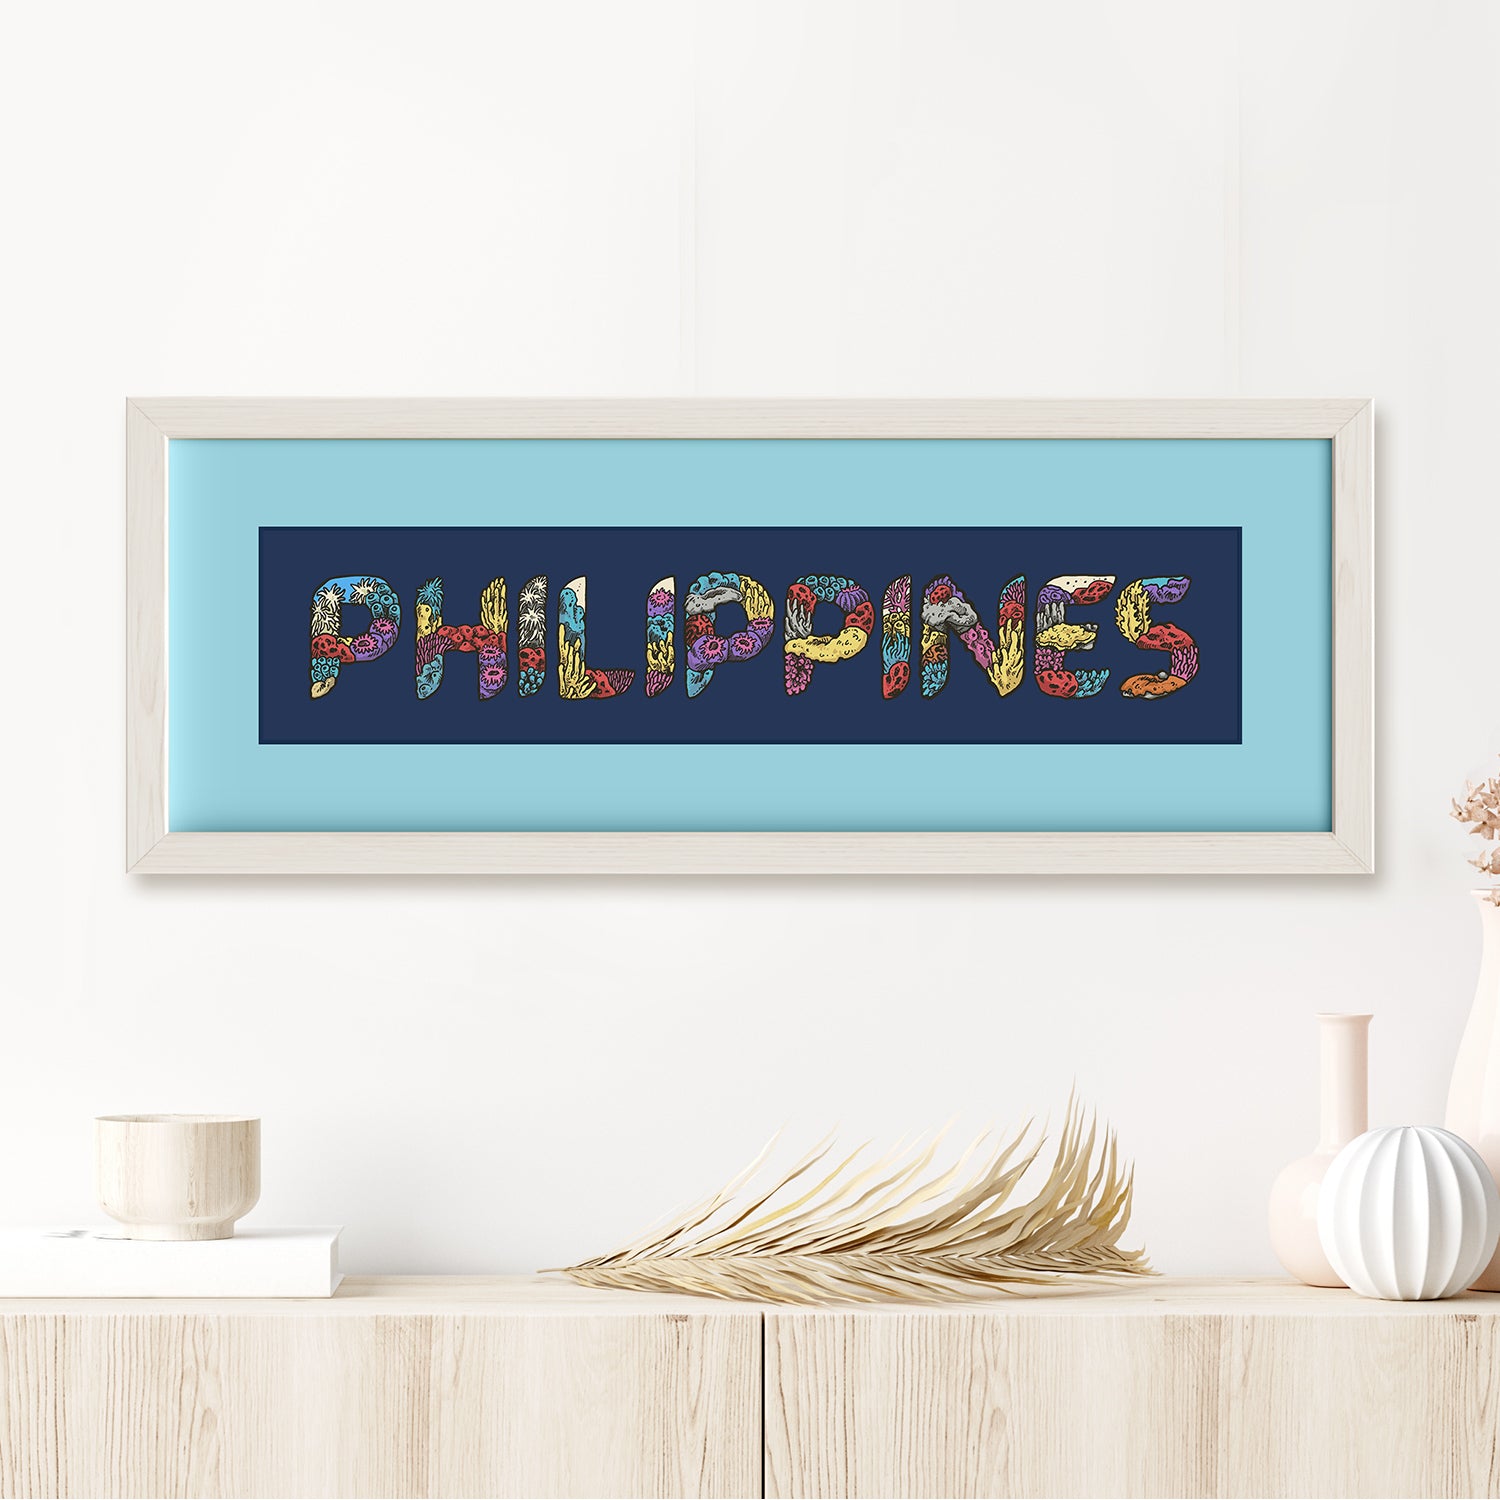 PH Philippines Filipino Letters Lettering Coral Artwork underwater artist artistic artsy artful home decoration decor gift idea beautiful finding house airbnb office sealife sea life ocean vibrant vibes dark navy blue background framed framing frame